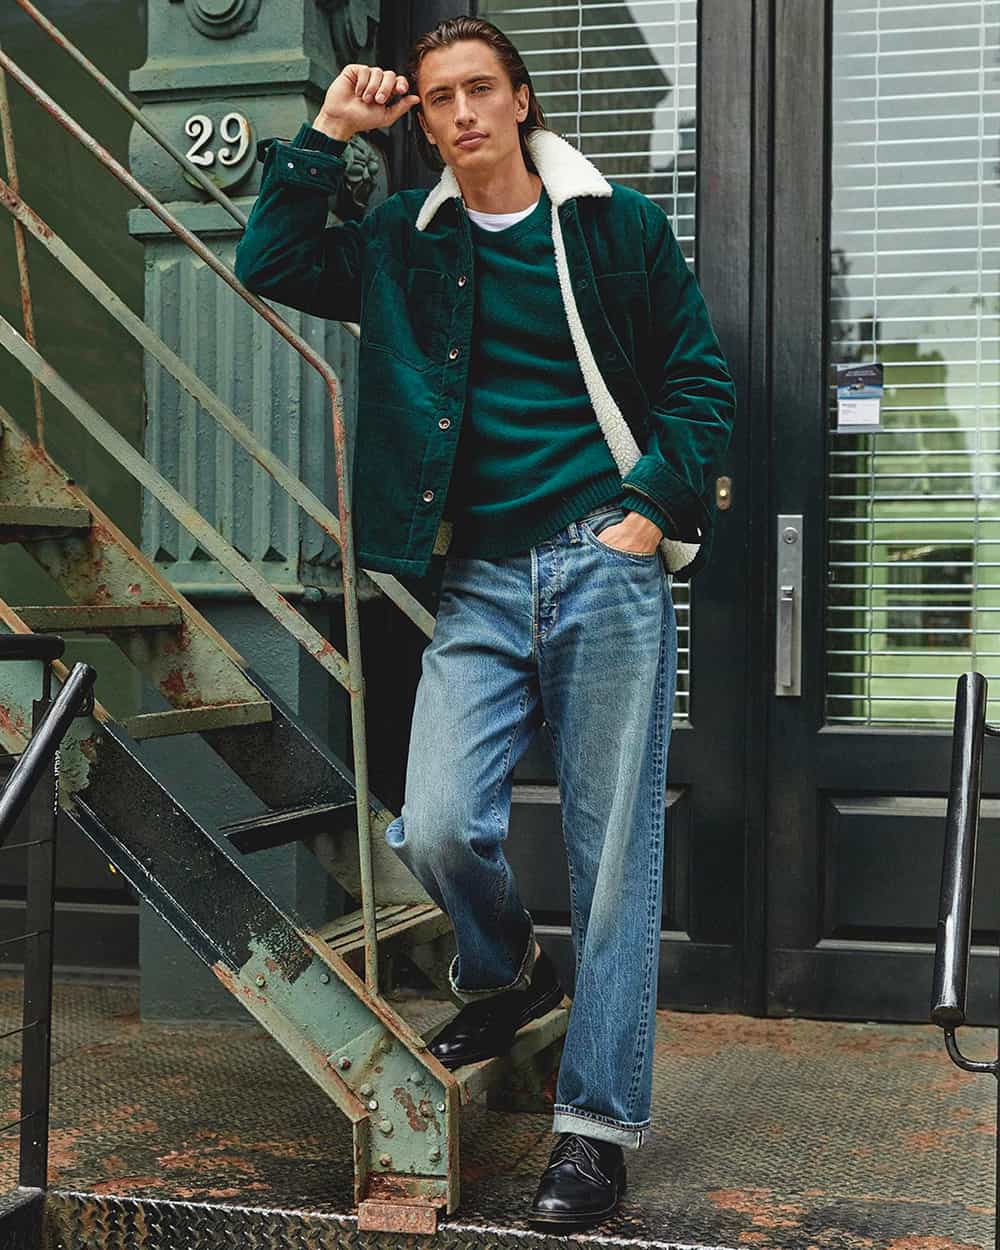 Man wearing Todd Snyder light wash jeans, green sweater, green borg collar jacket and black boots